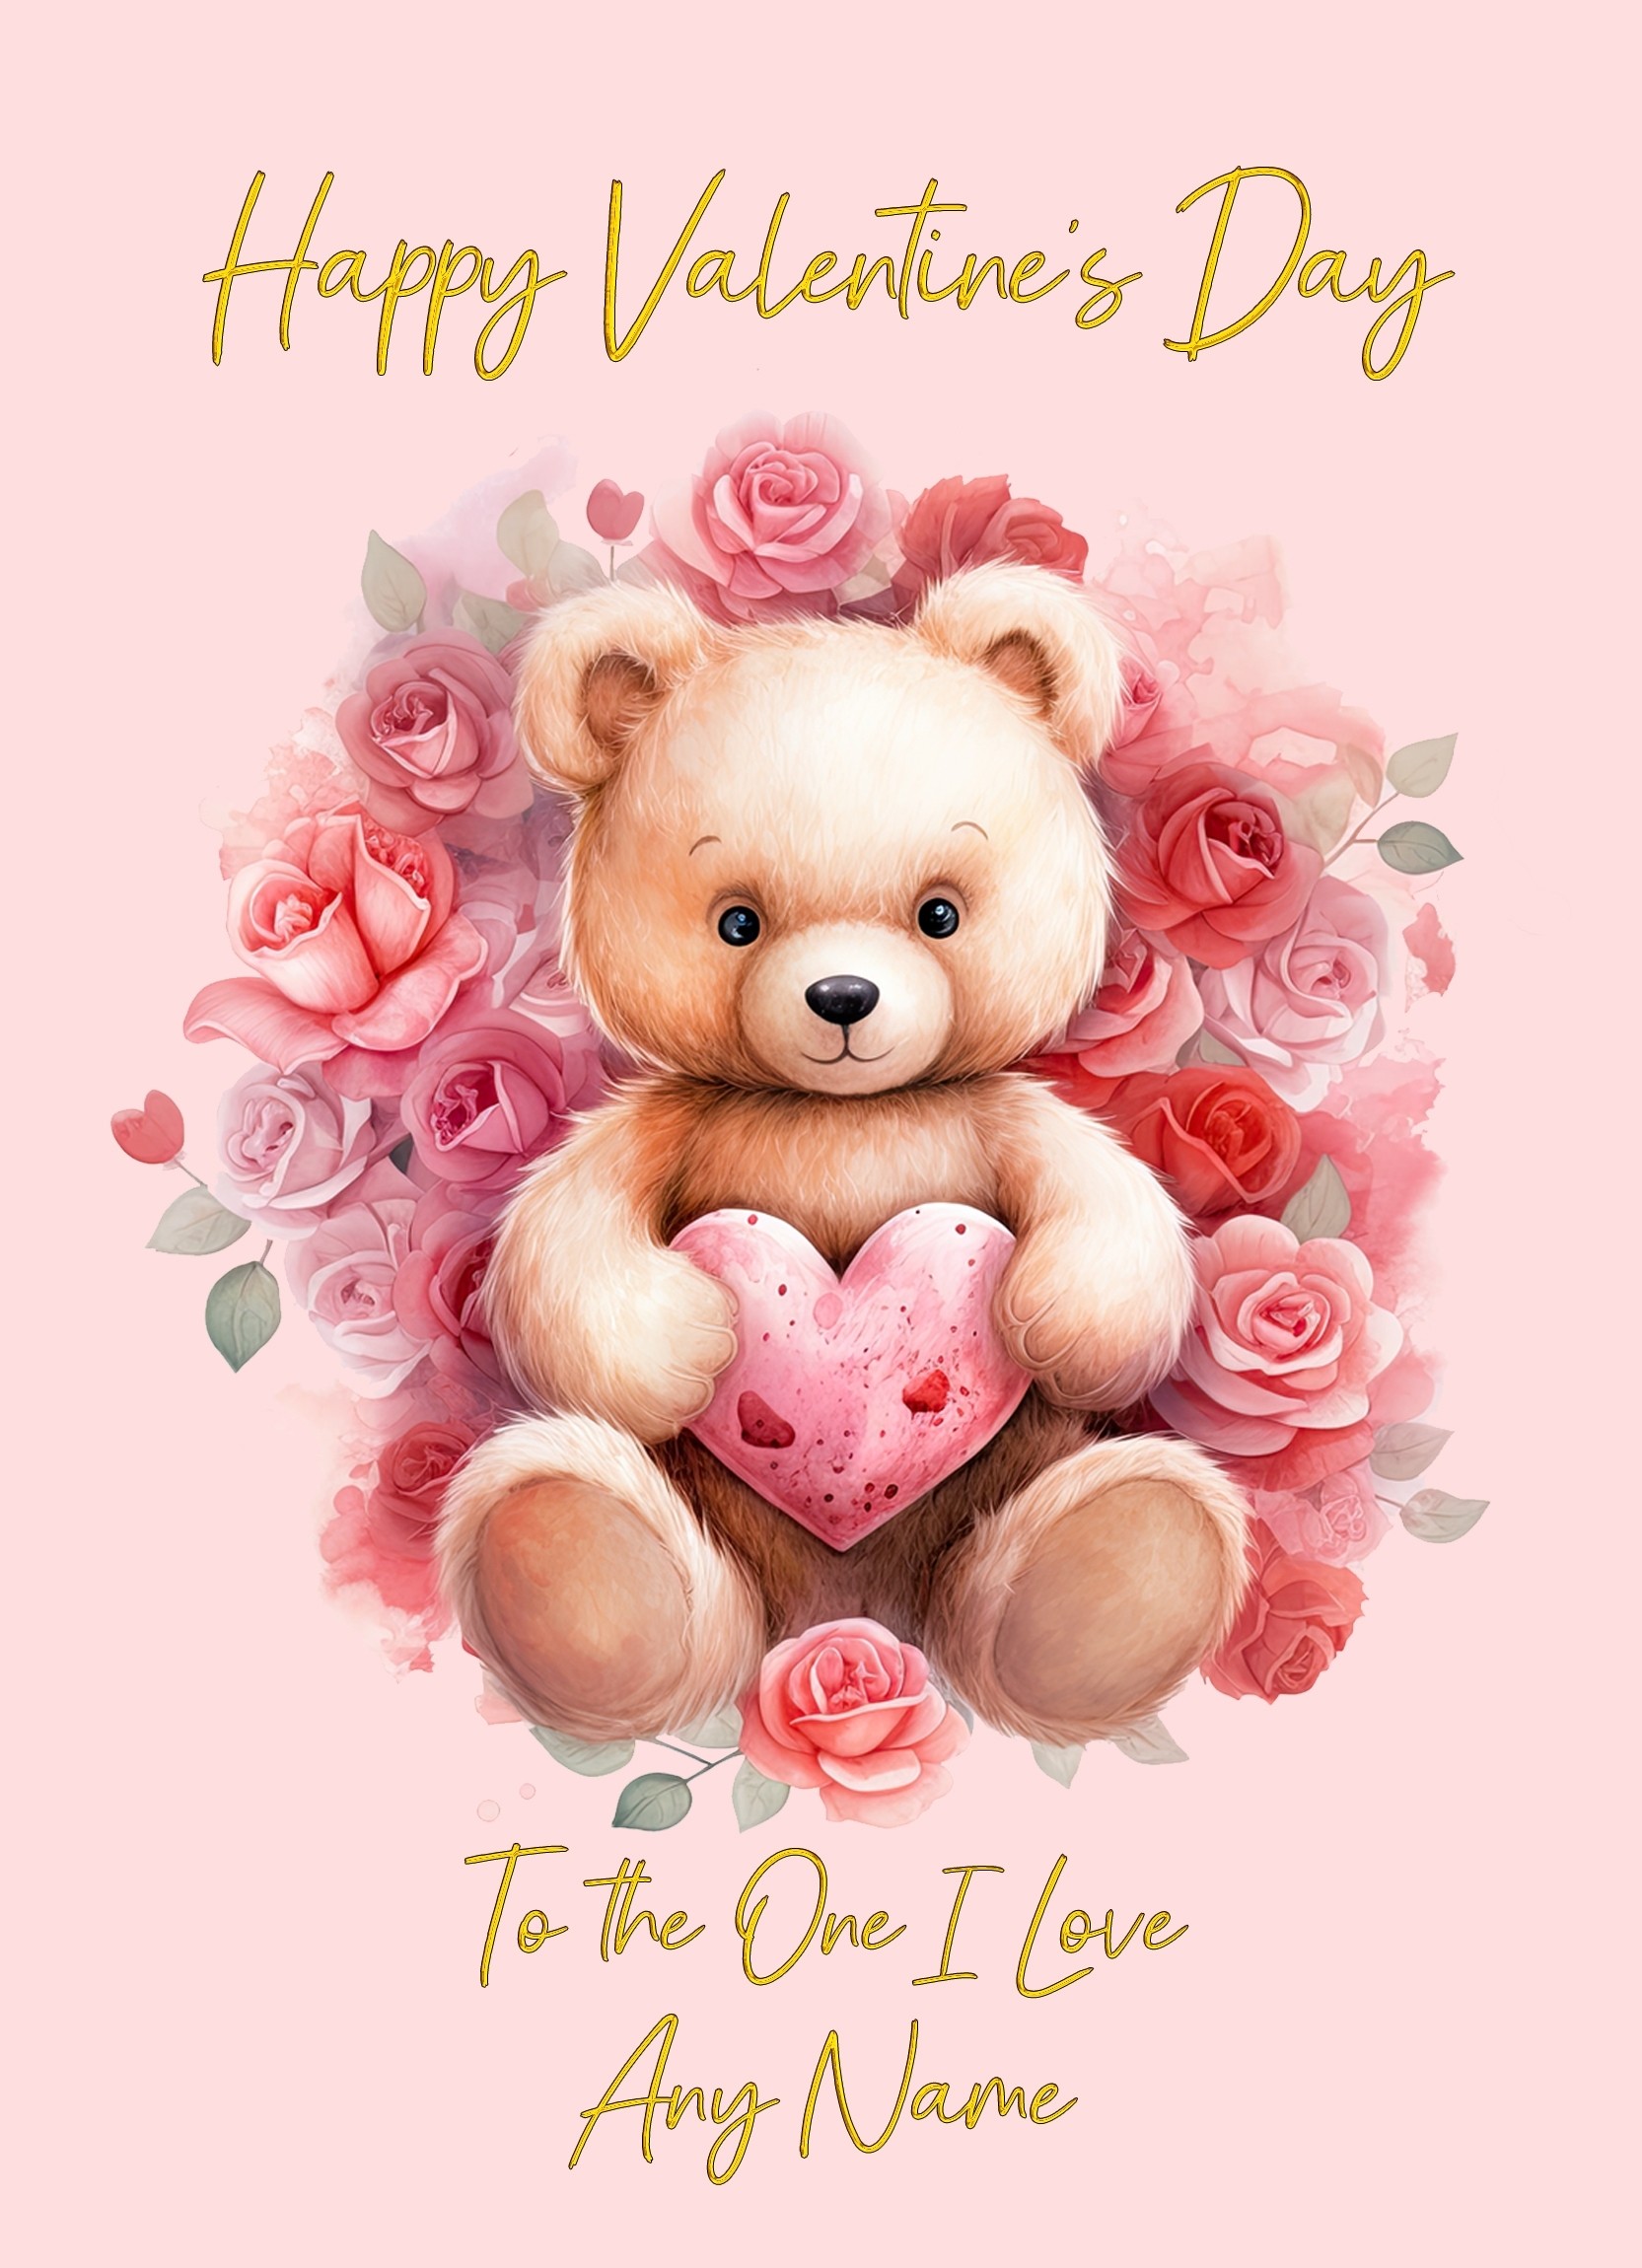 Personalised Valentines Day Card for One I Love (Cuddly Bear, Design 1)